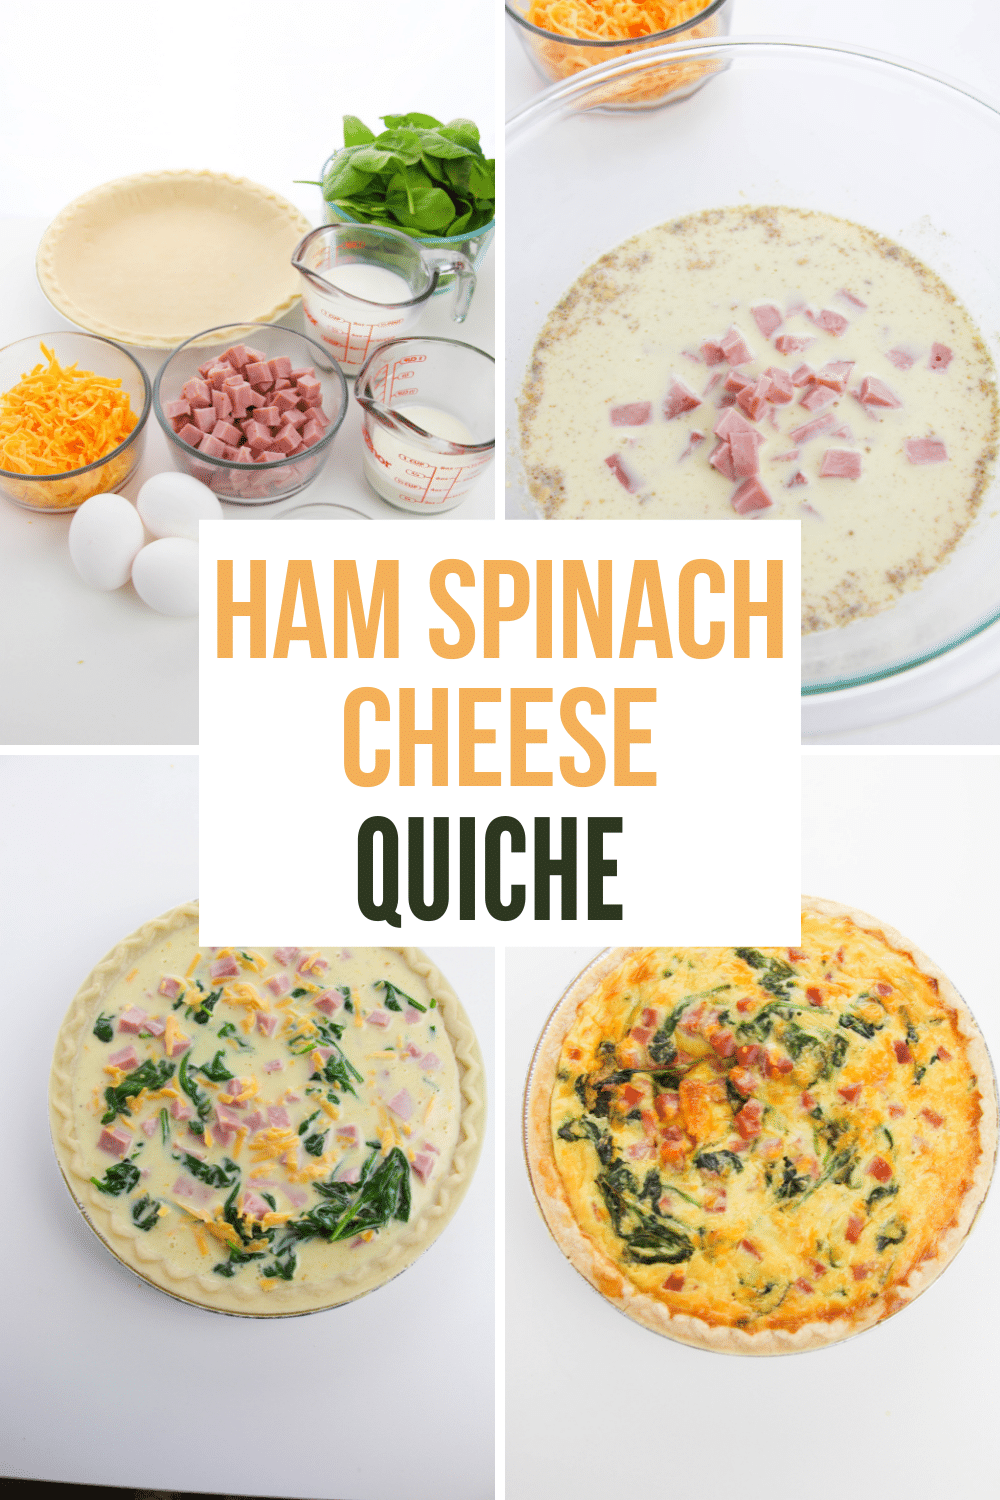 This ham spinach cheese quiche will be one of your favorite recipes. It’s versatile, easy to make, and can be eaten for any meal of the day. #quiche #ham #spinach #cheese #recipe via @wondermomwannab